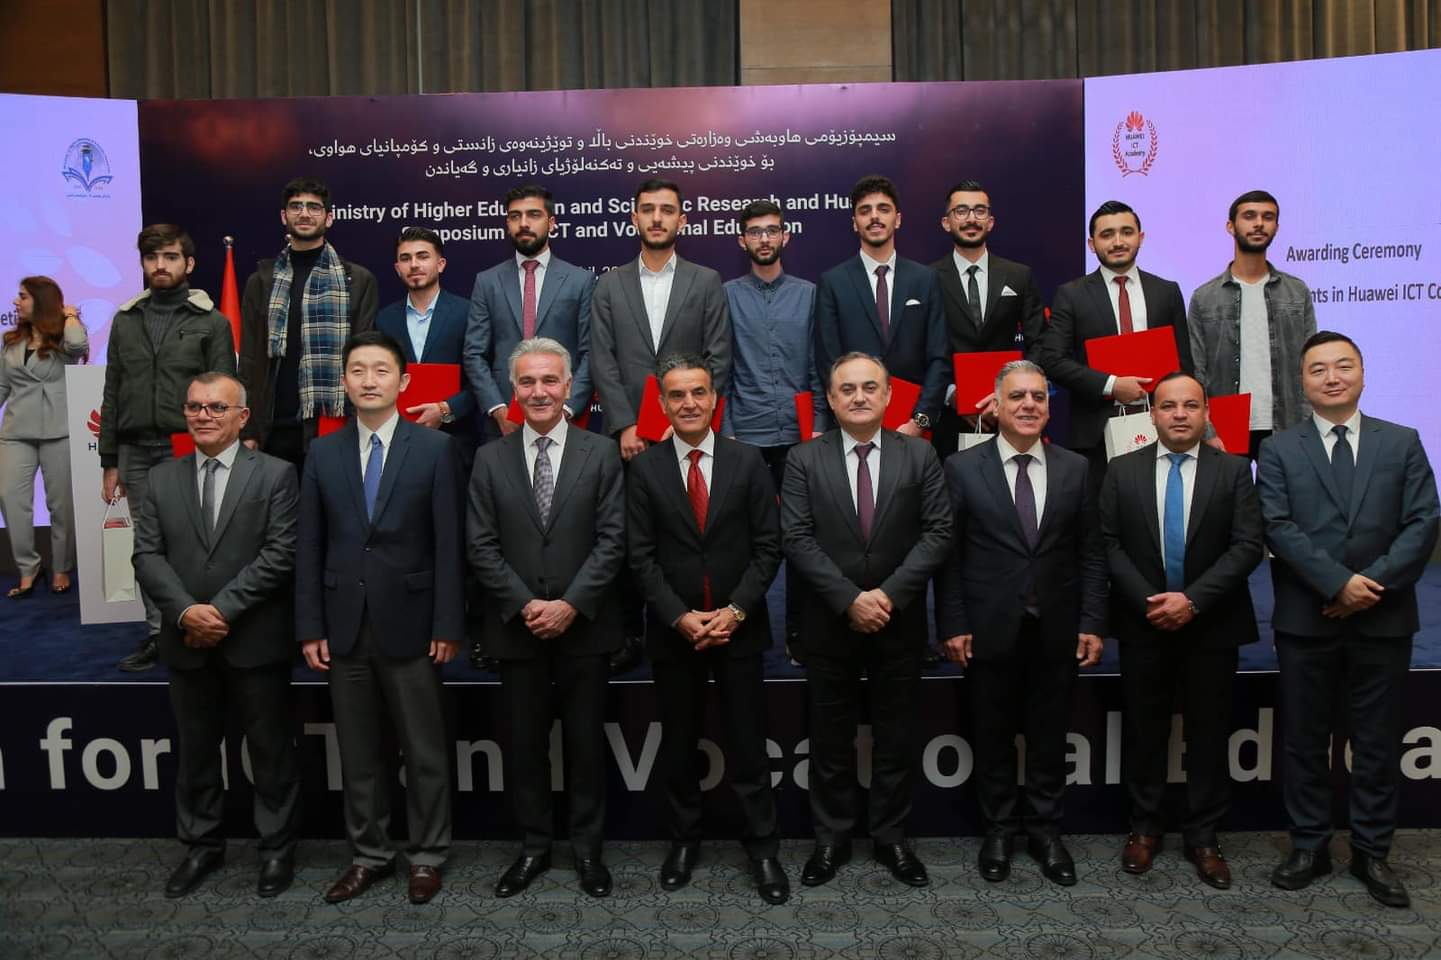 Empowering Iraqi students: Huawei's collaboration with KRI's Ministry of Higher Education